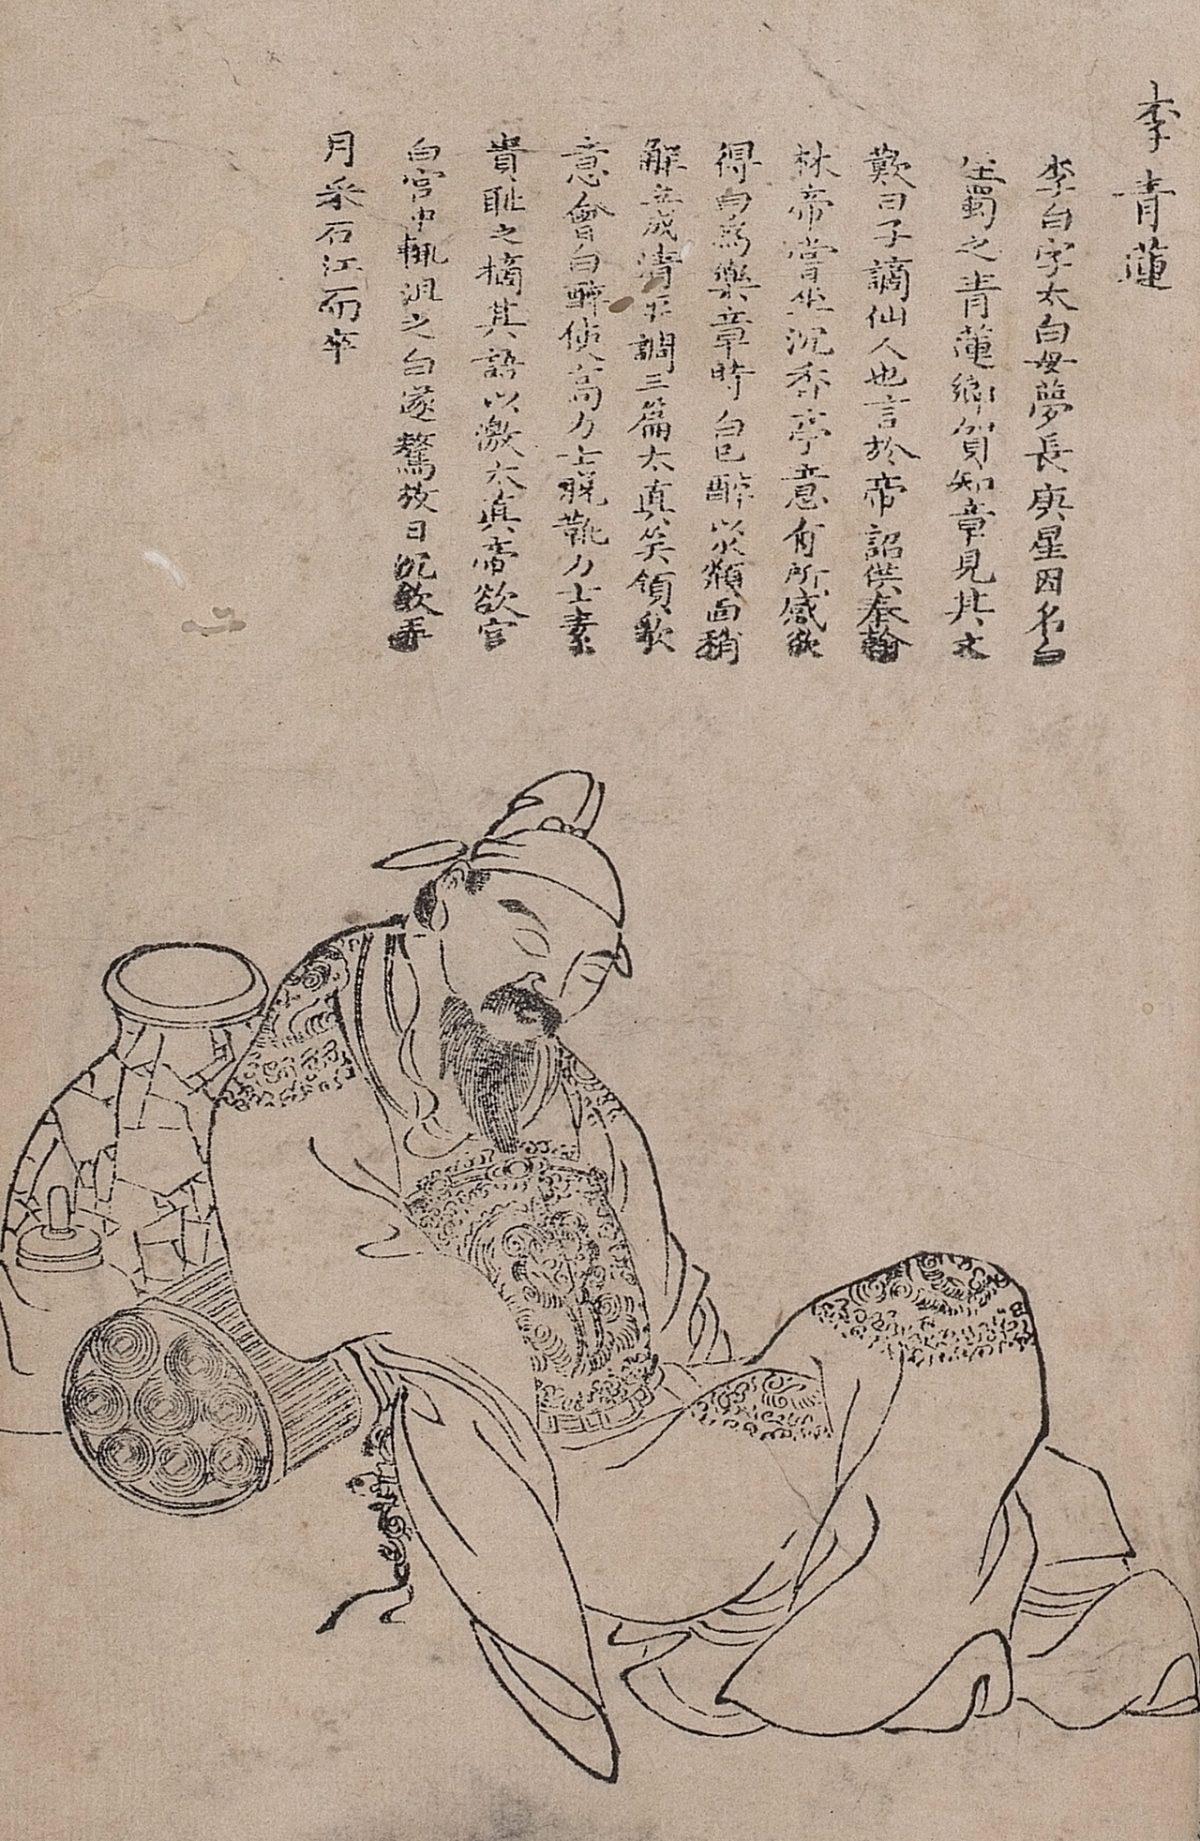 Li Bai, as depicted in the “Nanling Wushuang Pu” (a collection of 40 illustrations depicting historical figures spanning from the Han to the Song dynasties) by Jin Guliang, Ming Dynasty. (Public Domain)